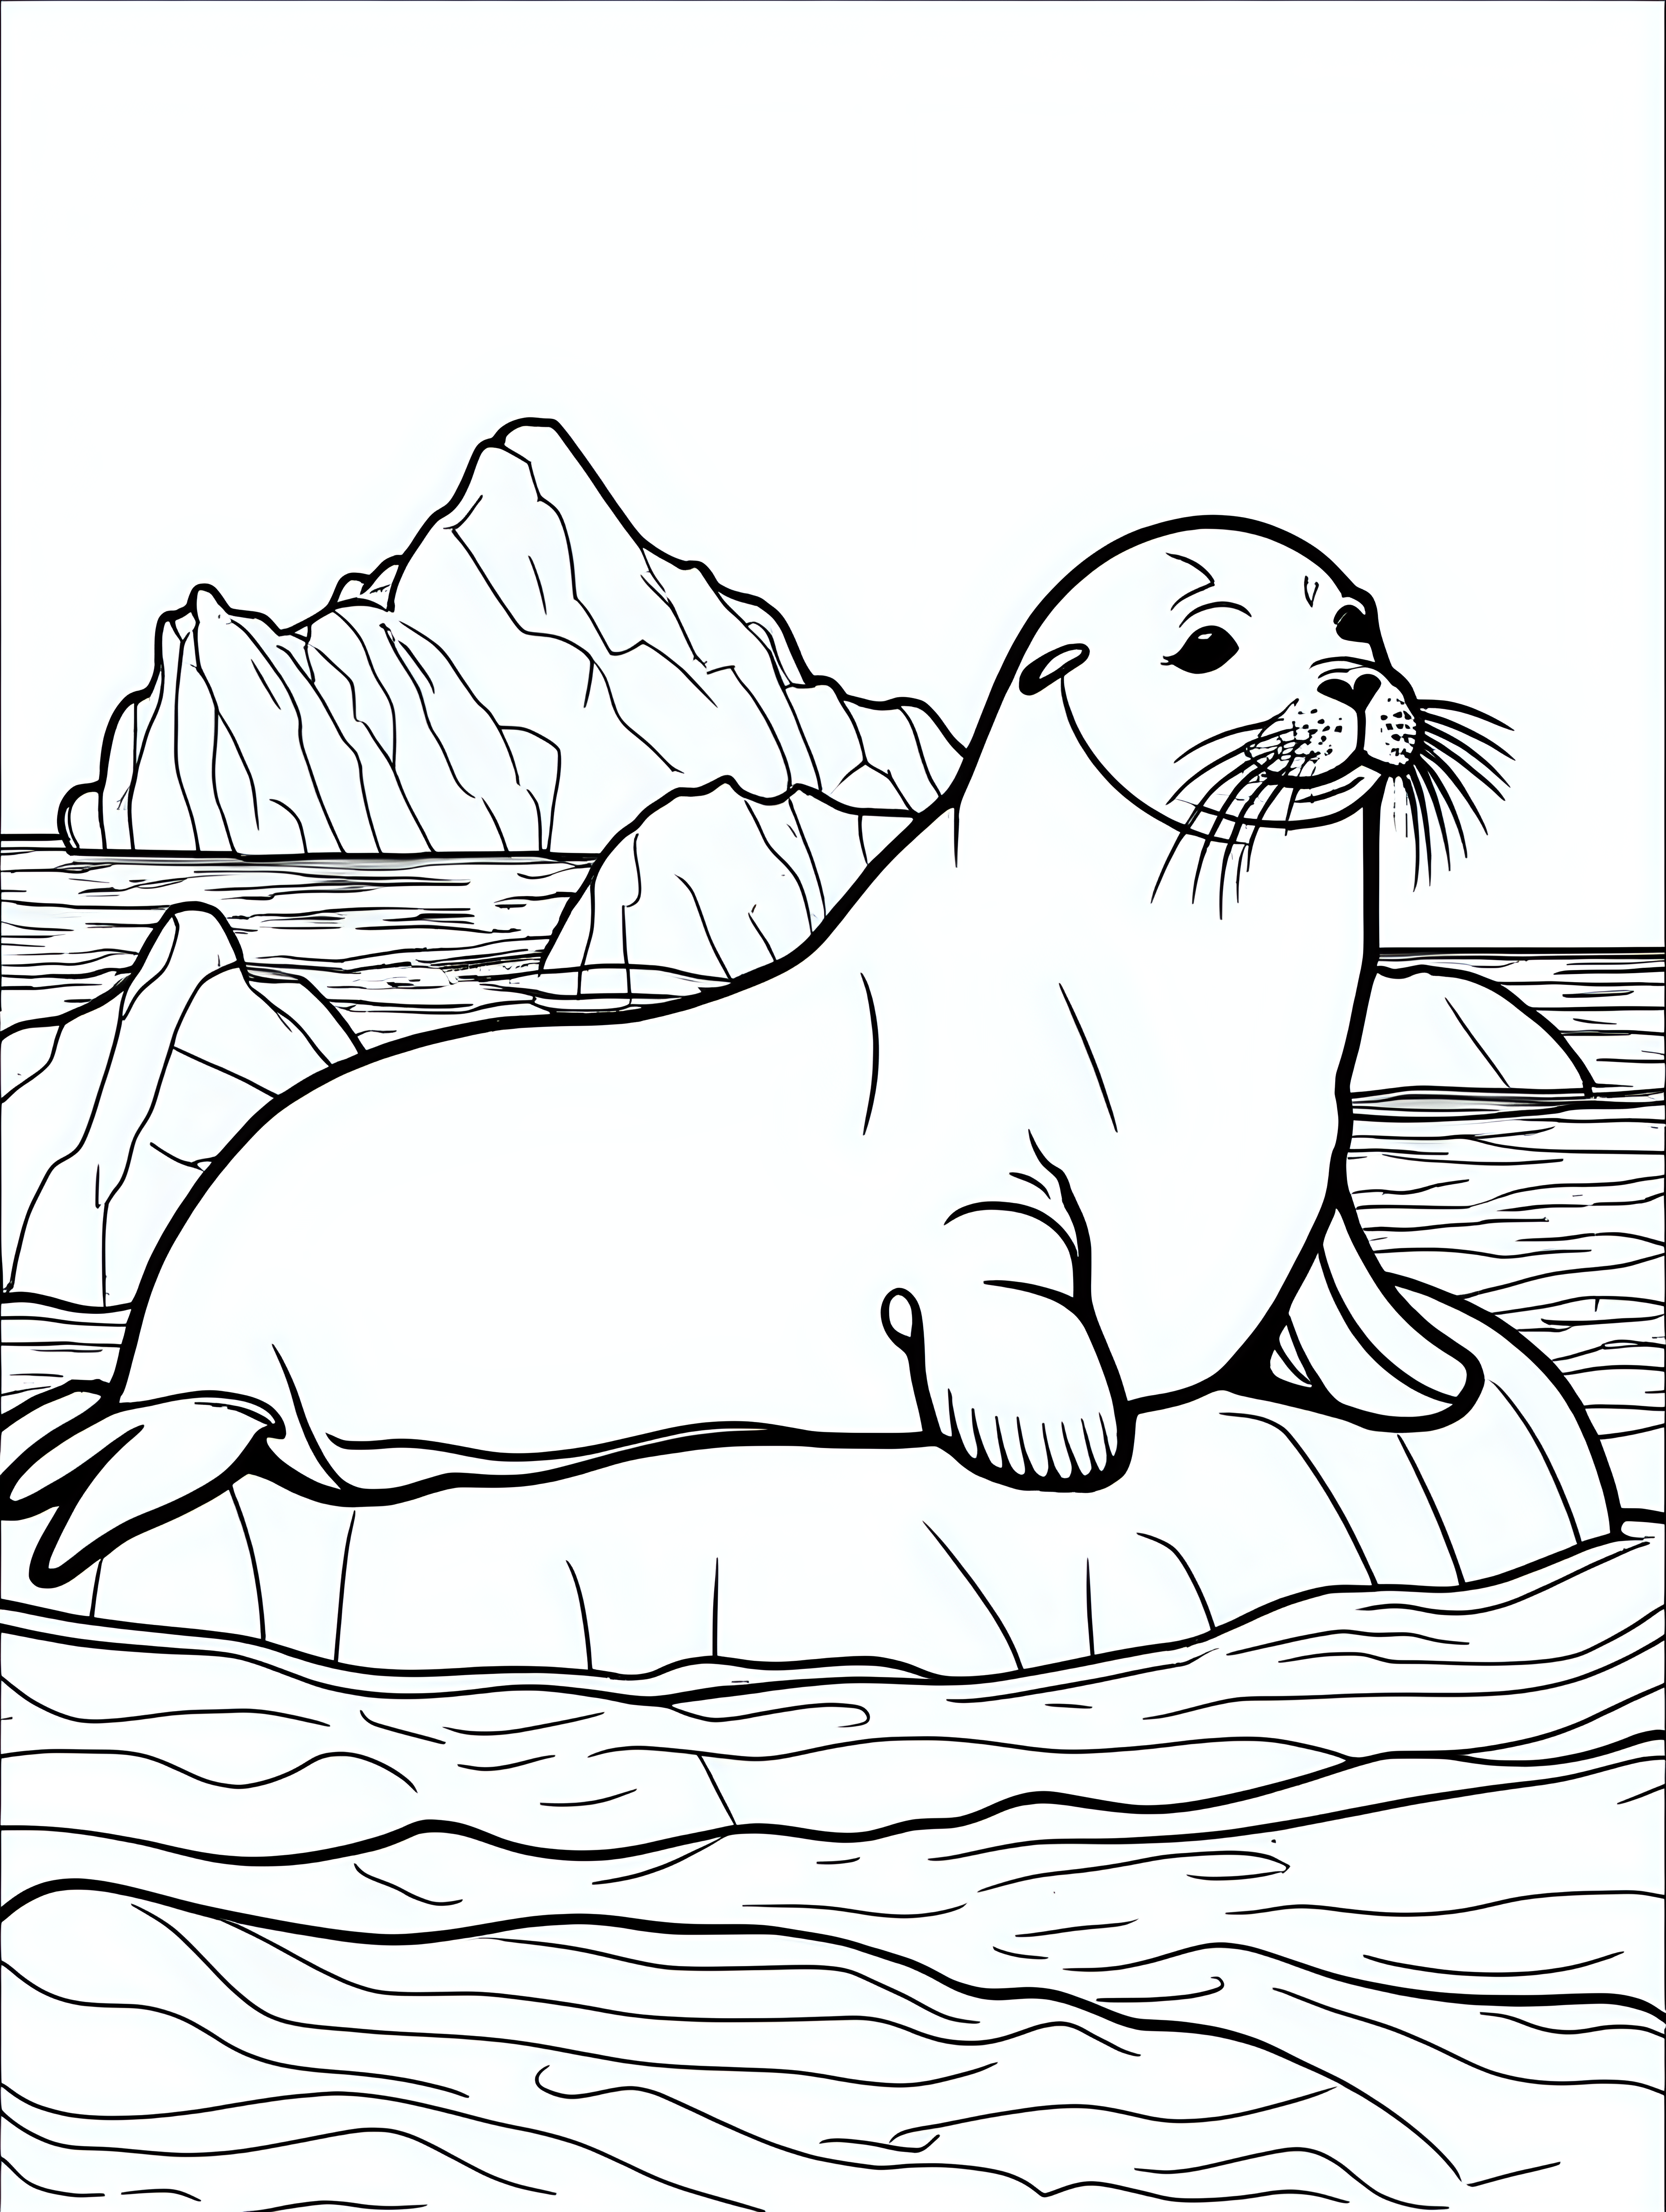 seal on a afloating iceberg, coloring page, low details, no colors, no shadows